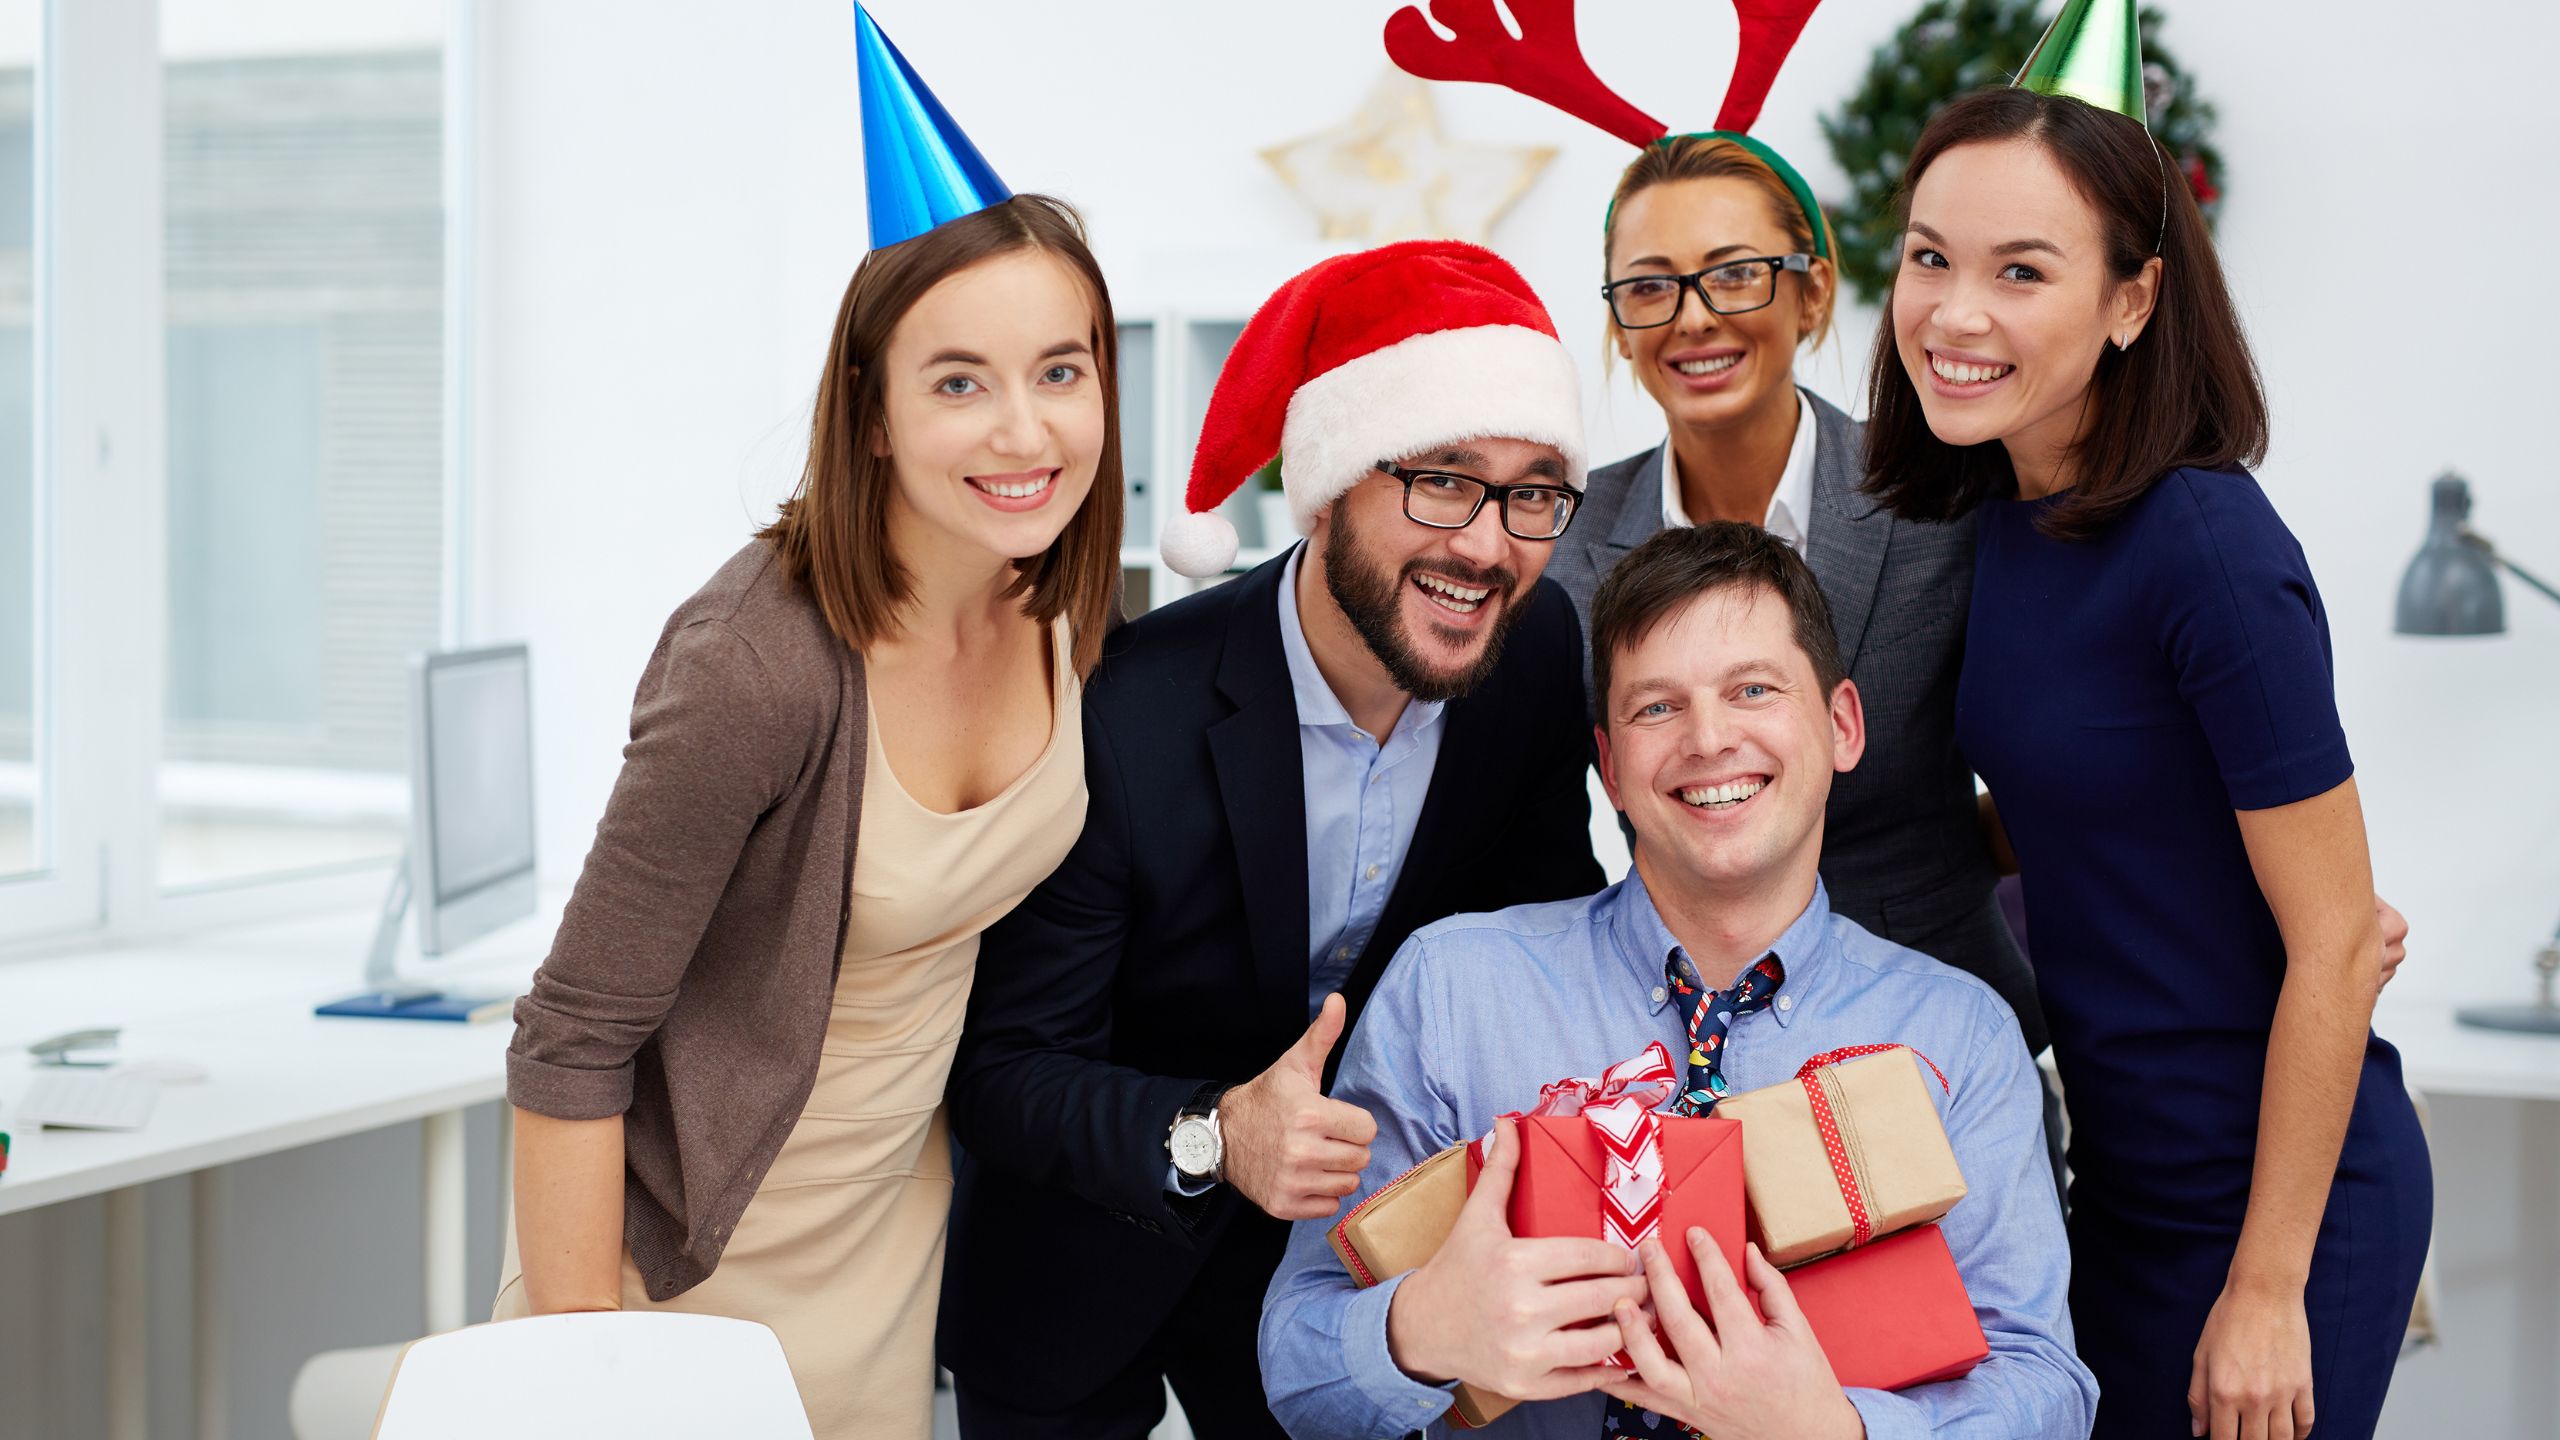 The top 5 corporate team-building ideas for Christmas